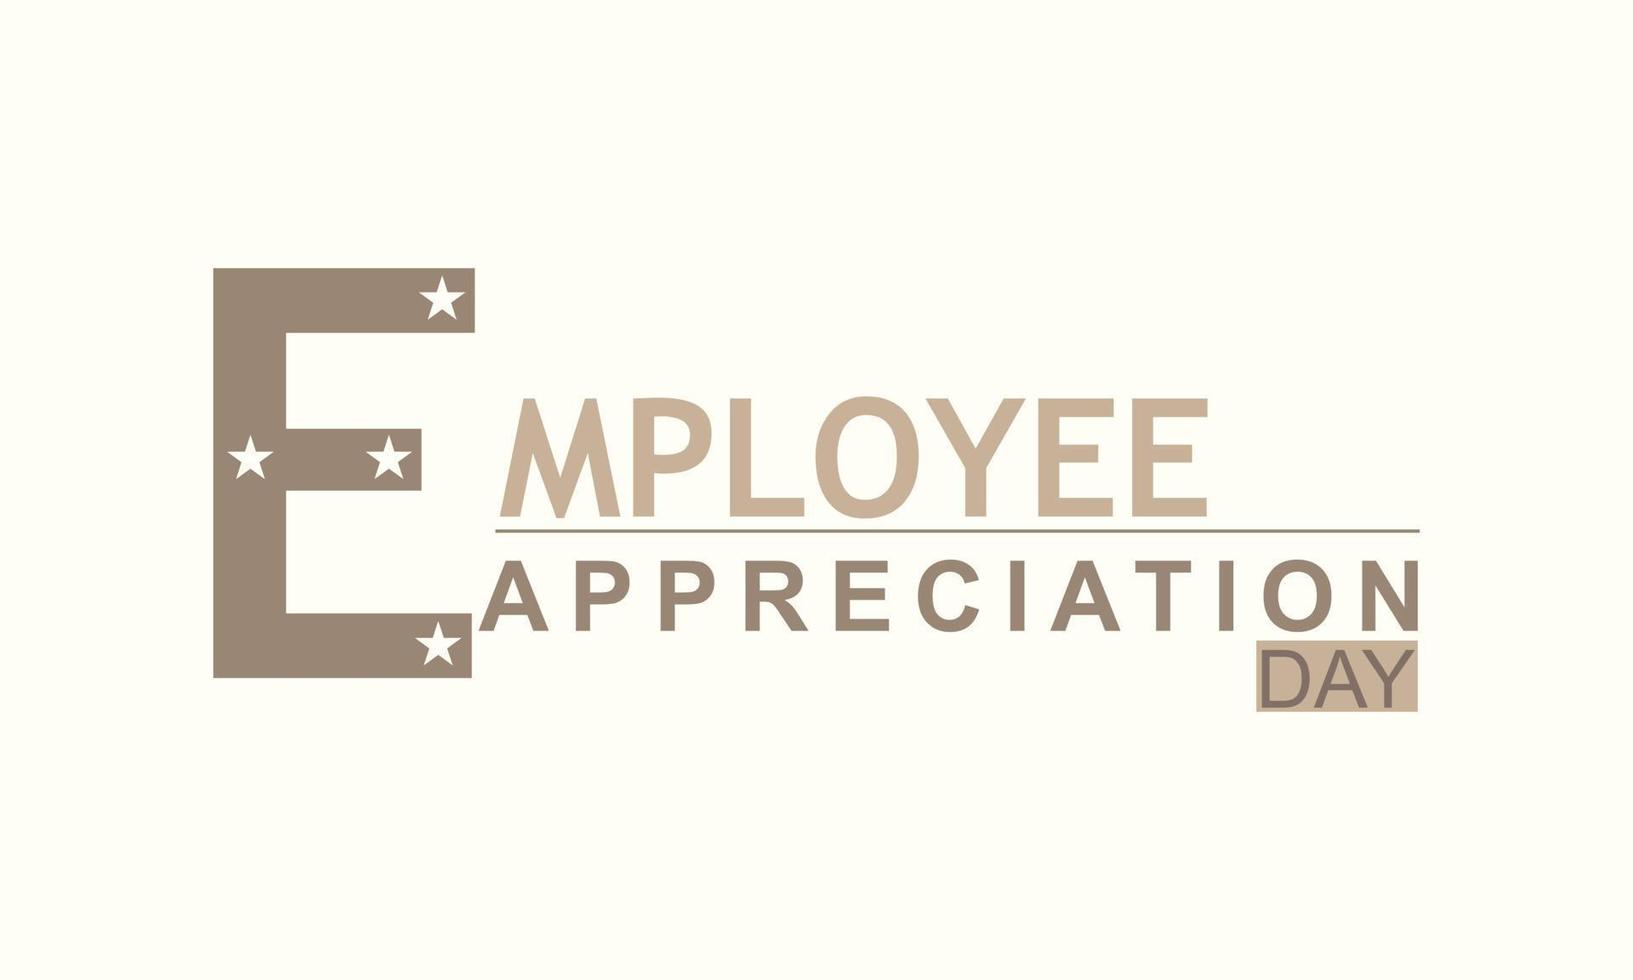 Employee Appreciation Day. Template for background, banner, card, poster vector